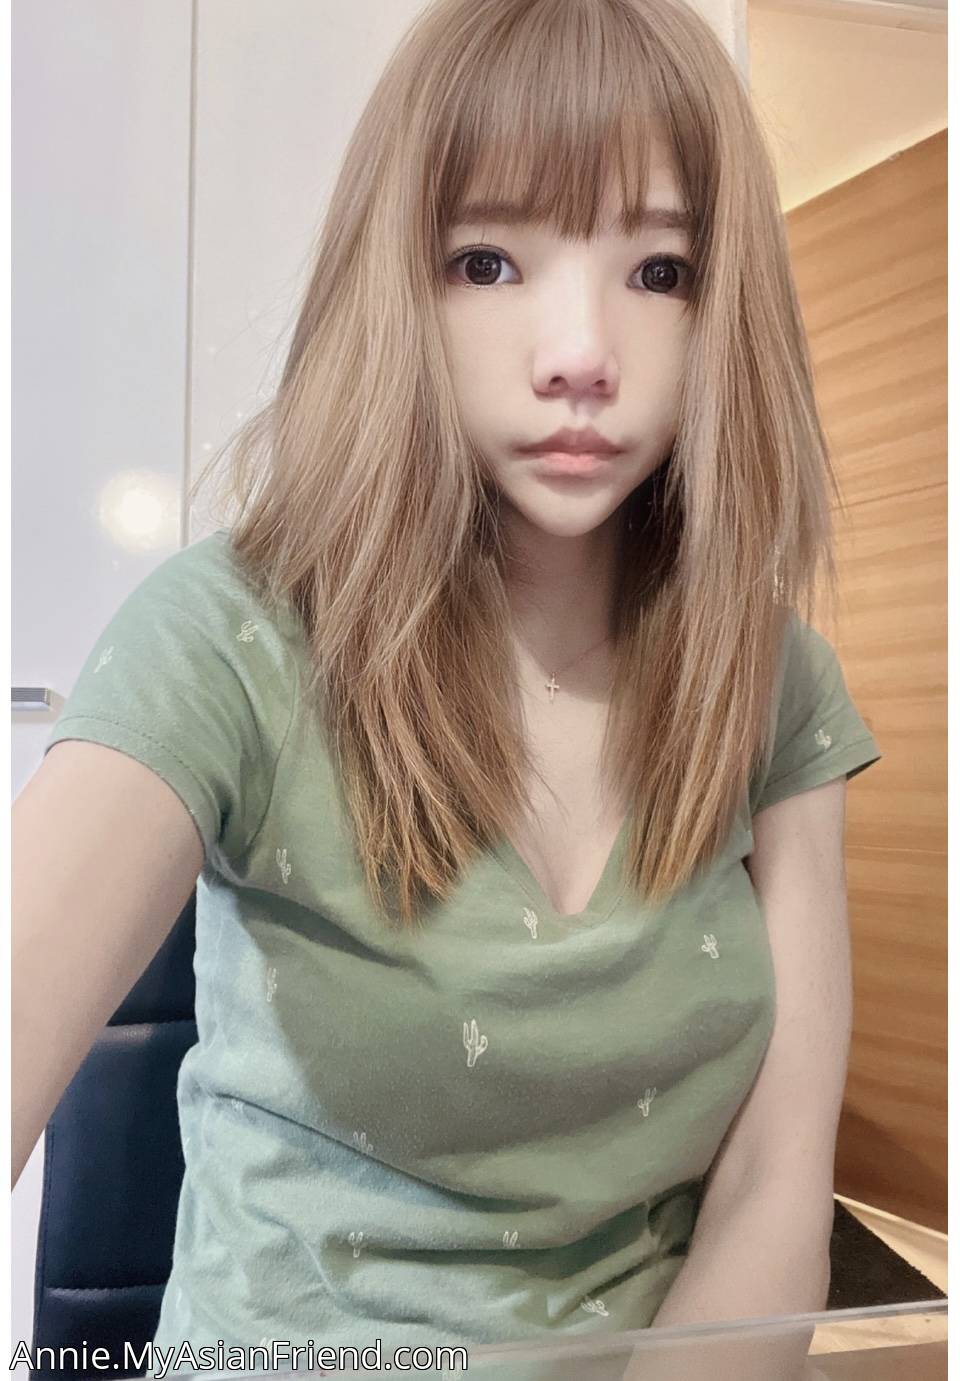 Annie's personal blog photo 1 added Tuesday the 13th of September 2022